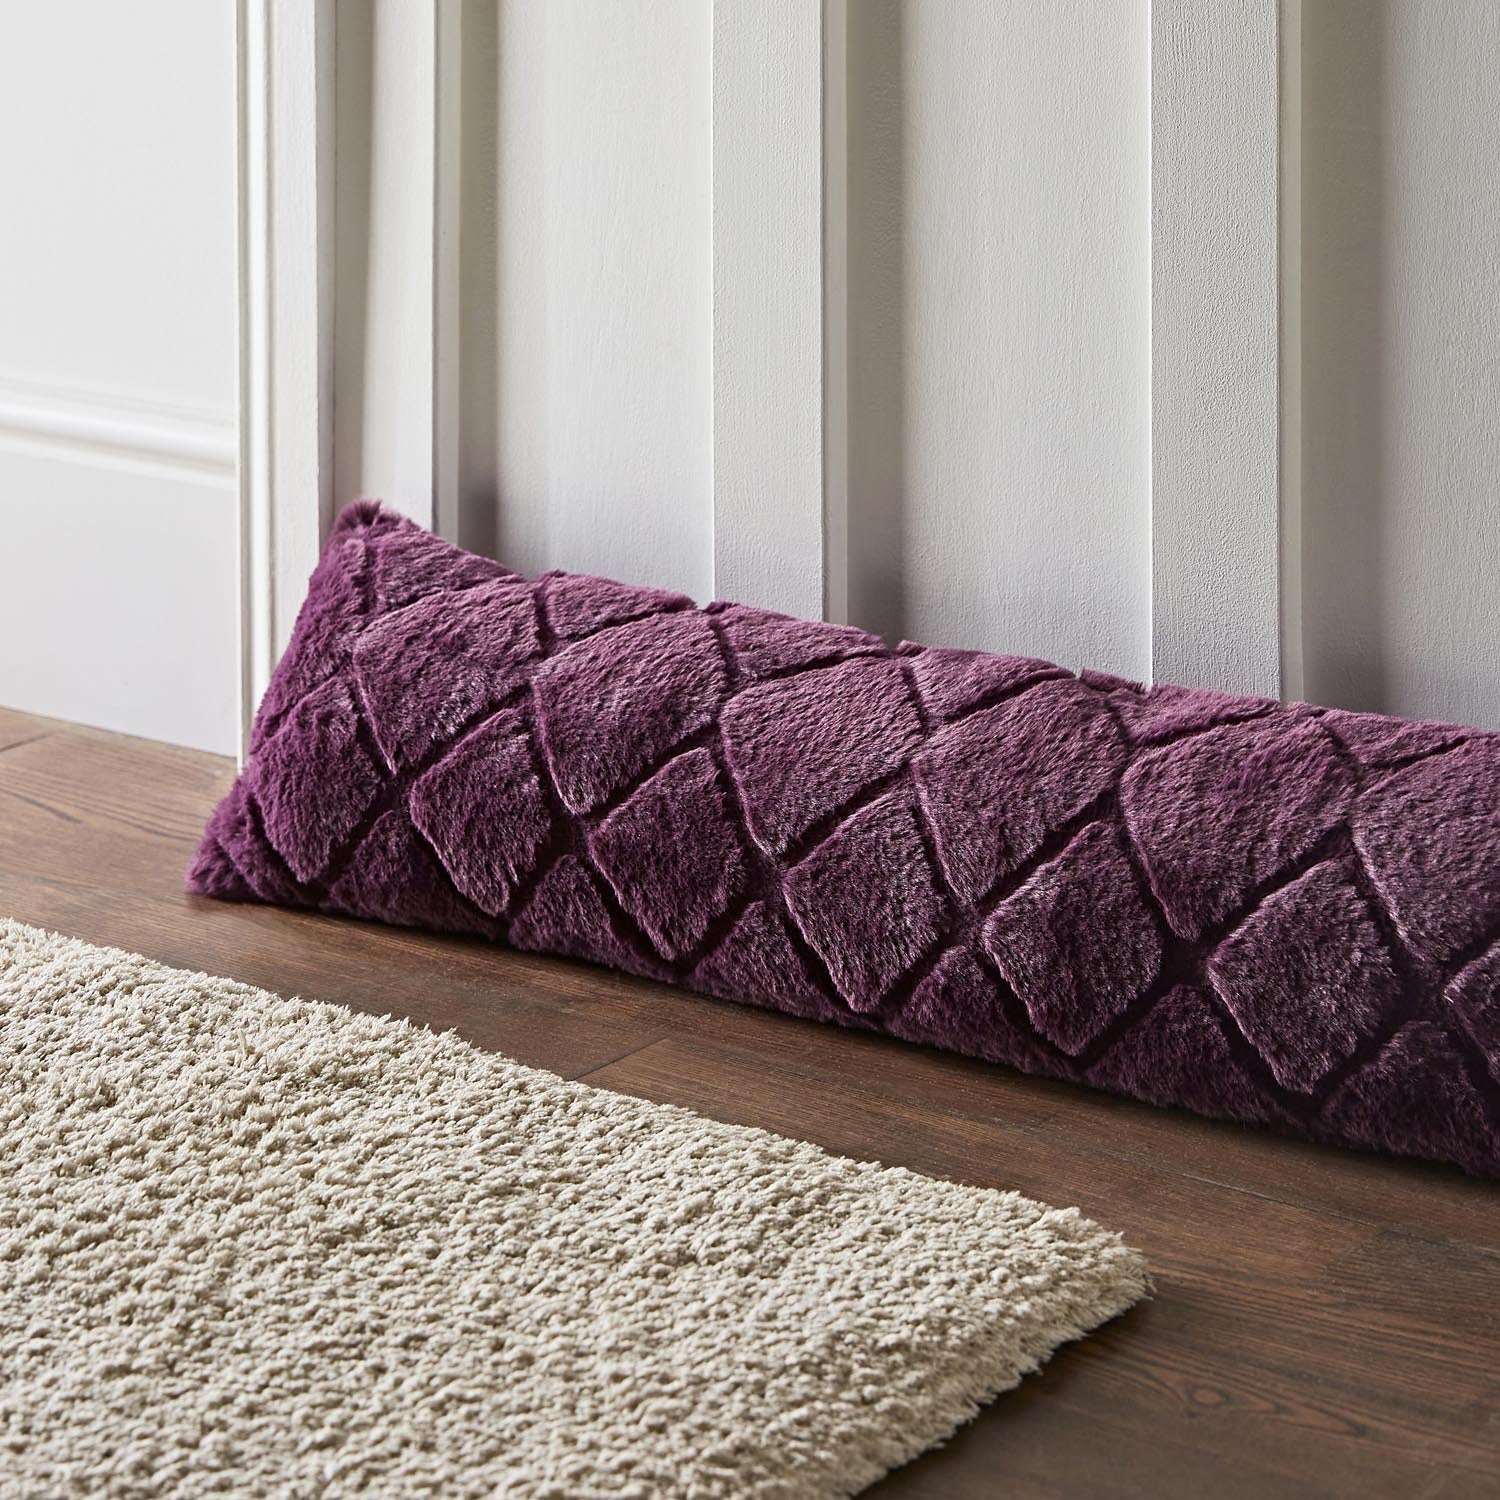 Catherine Lansfield Draught Excluder 90cm x 20cm - Plum 1 Shaws Department Stores